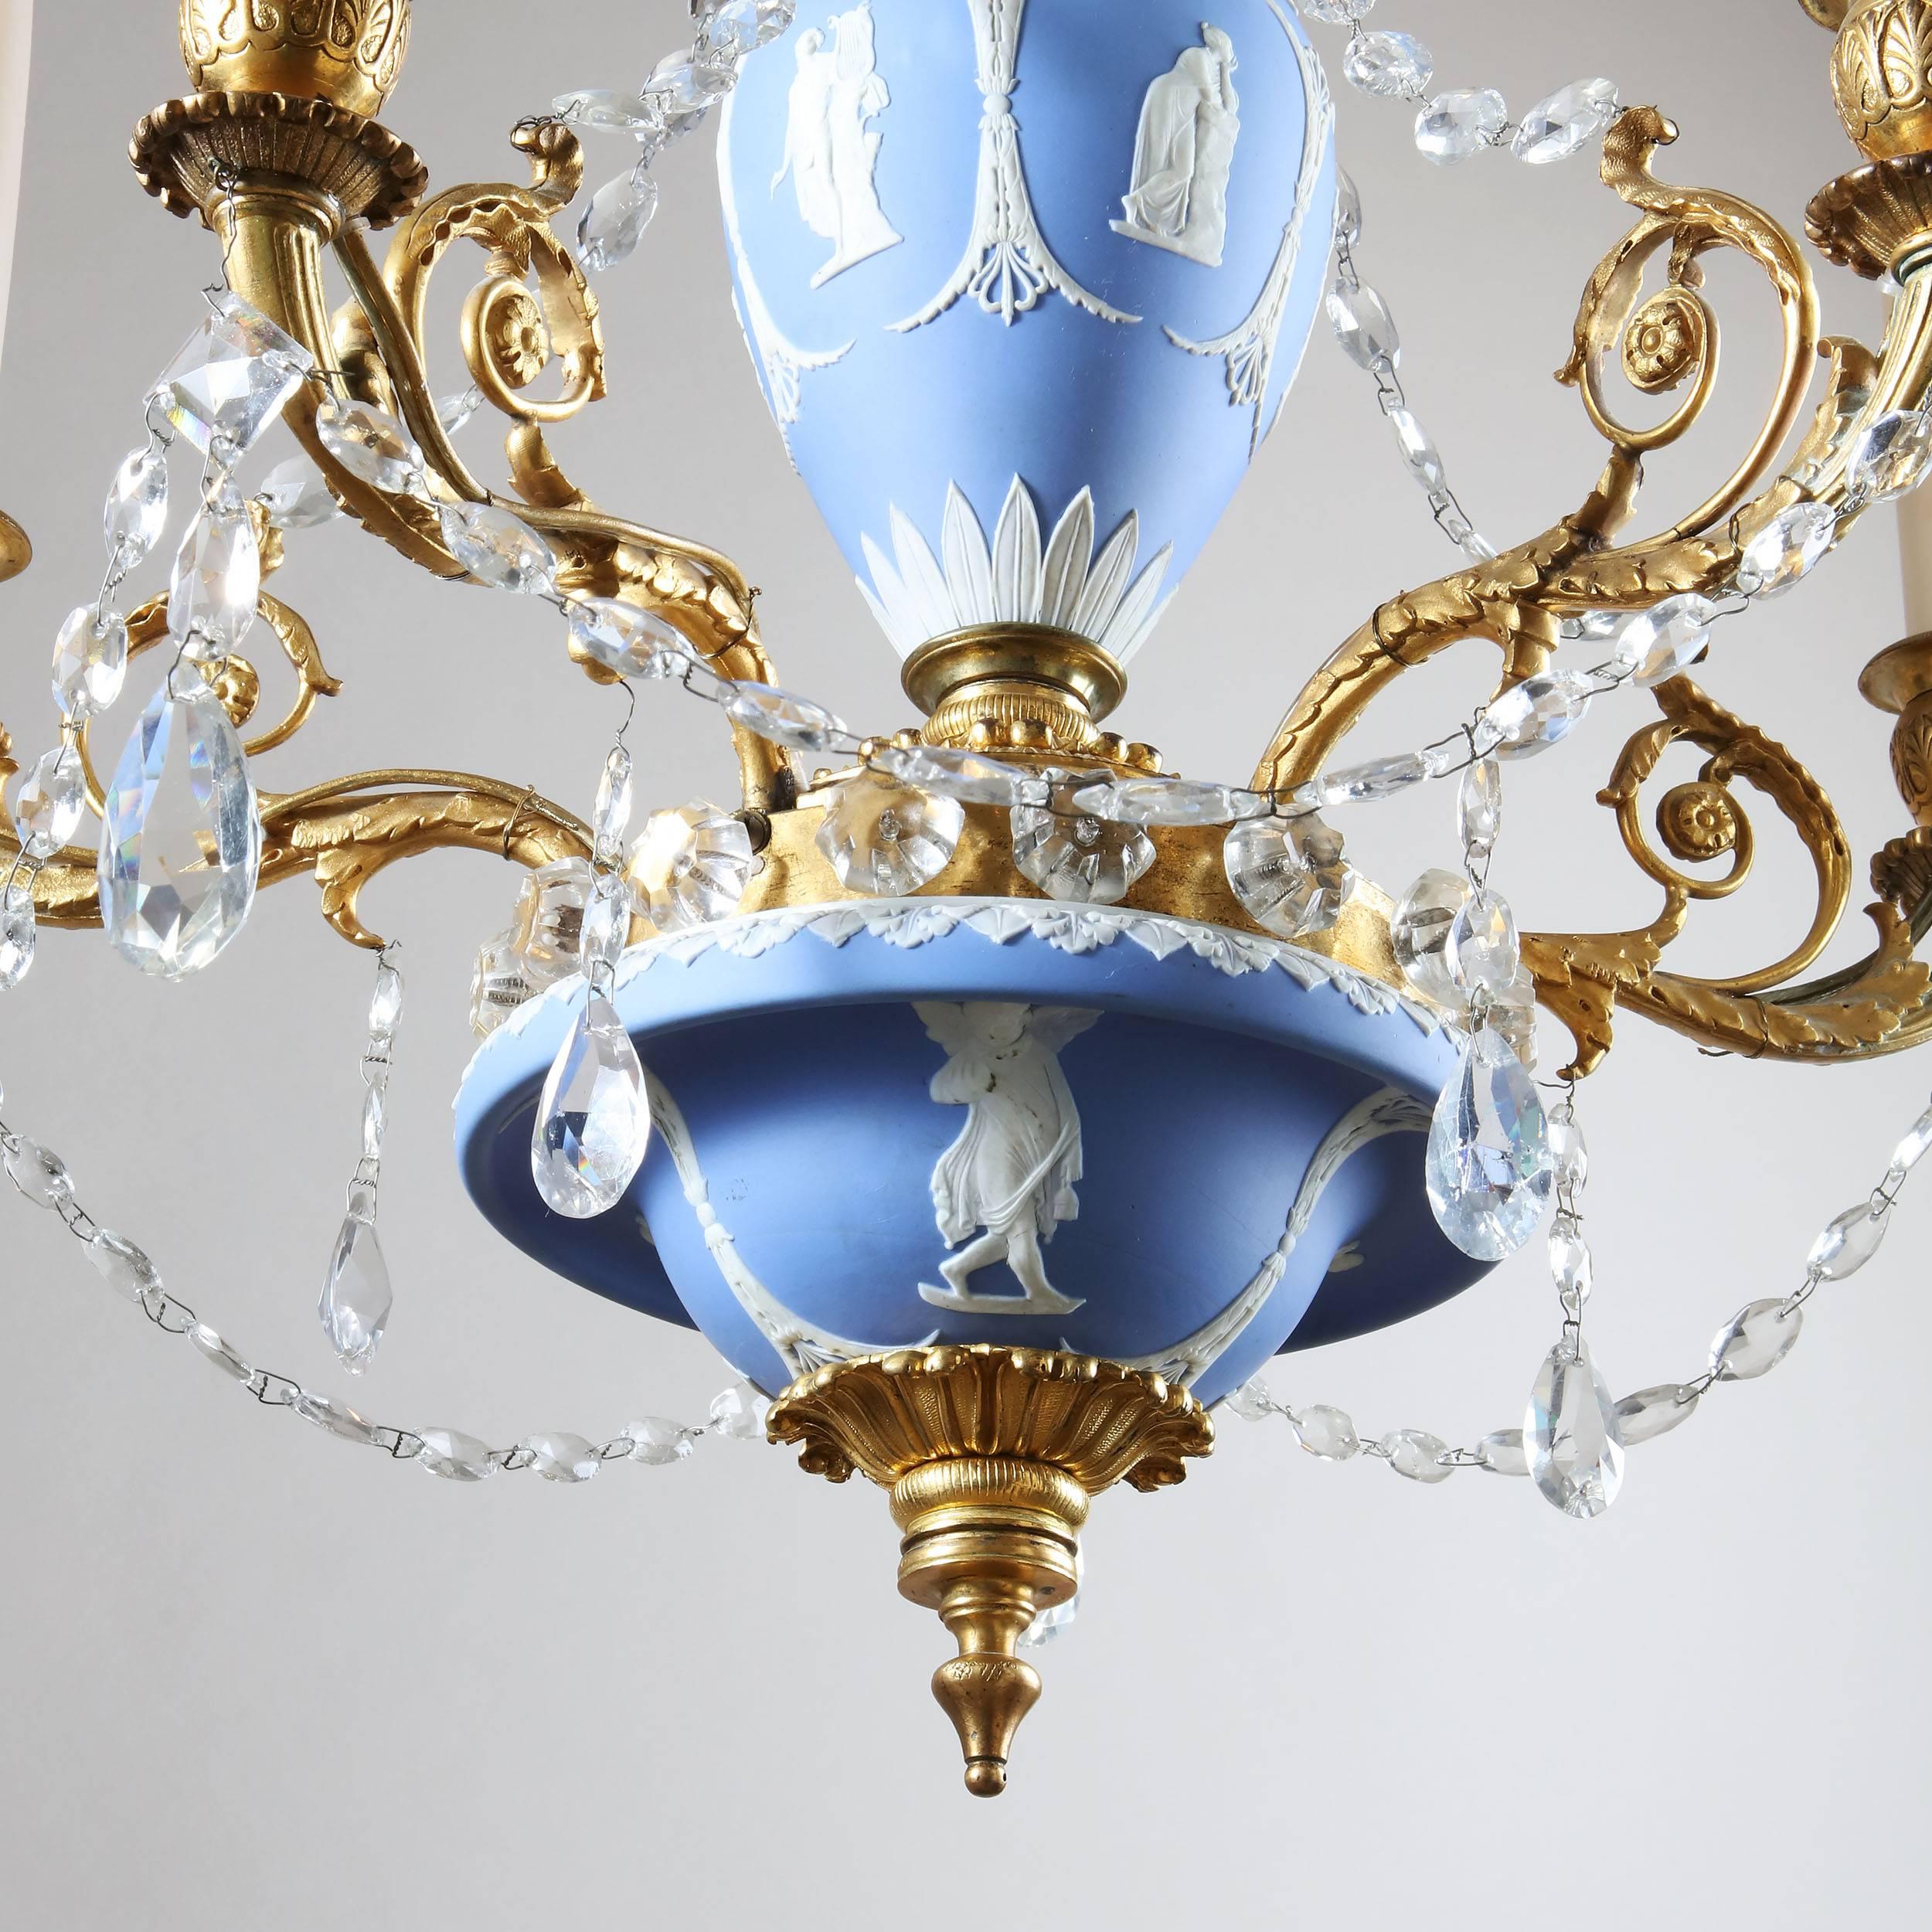 A rare early 19th century Regency period English chandelier, the body of Wedgwood jasperware mounted with elaborate gilt ormolu metal work issuing five electrified candle arms and hung with crystal drops.